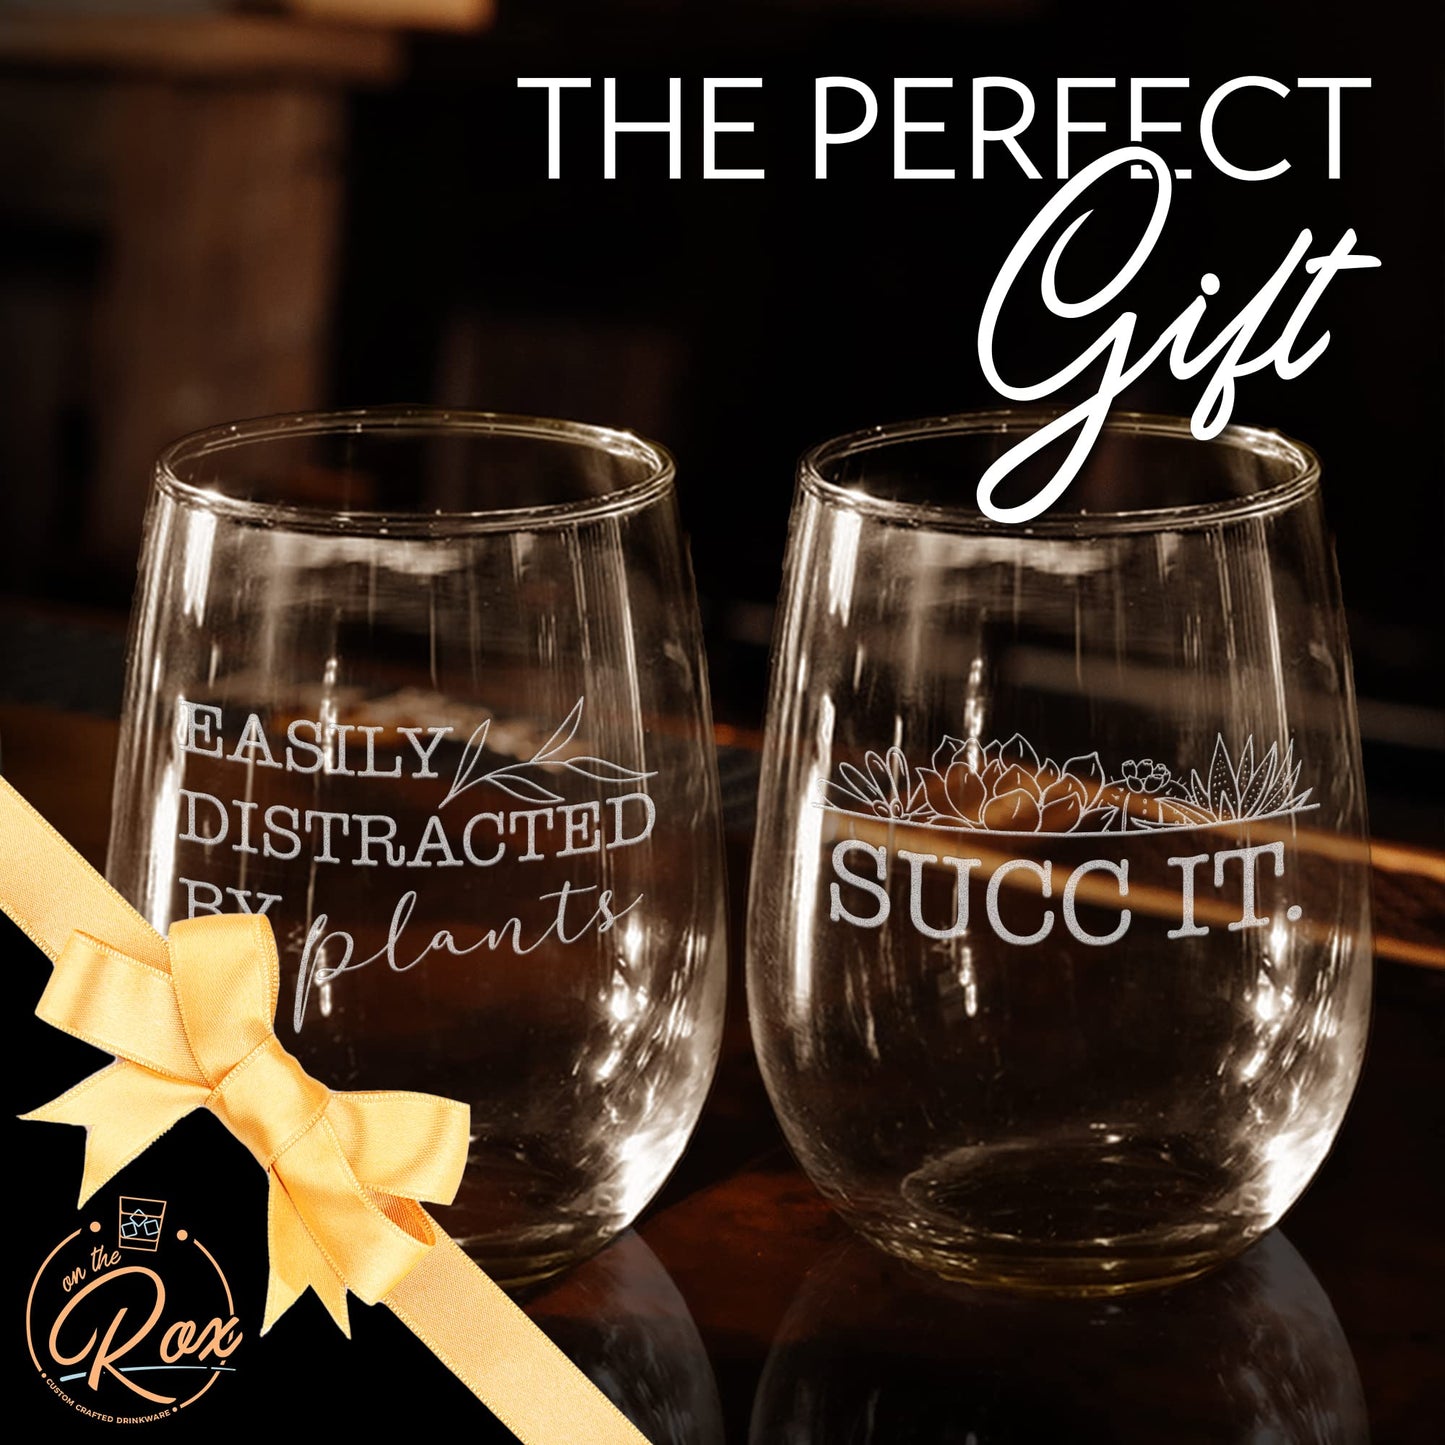 Plant Gifts for Plant Lovers - “Easily Distracted By Plants” “ Succ It” 2PC Wine Glass Set - Engraved